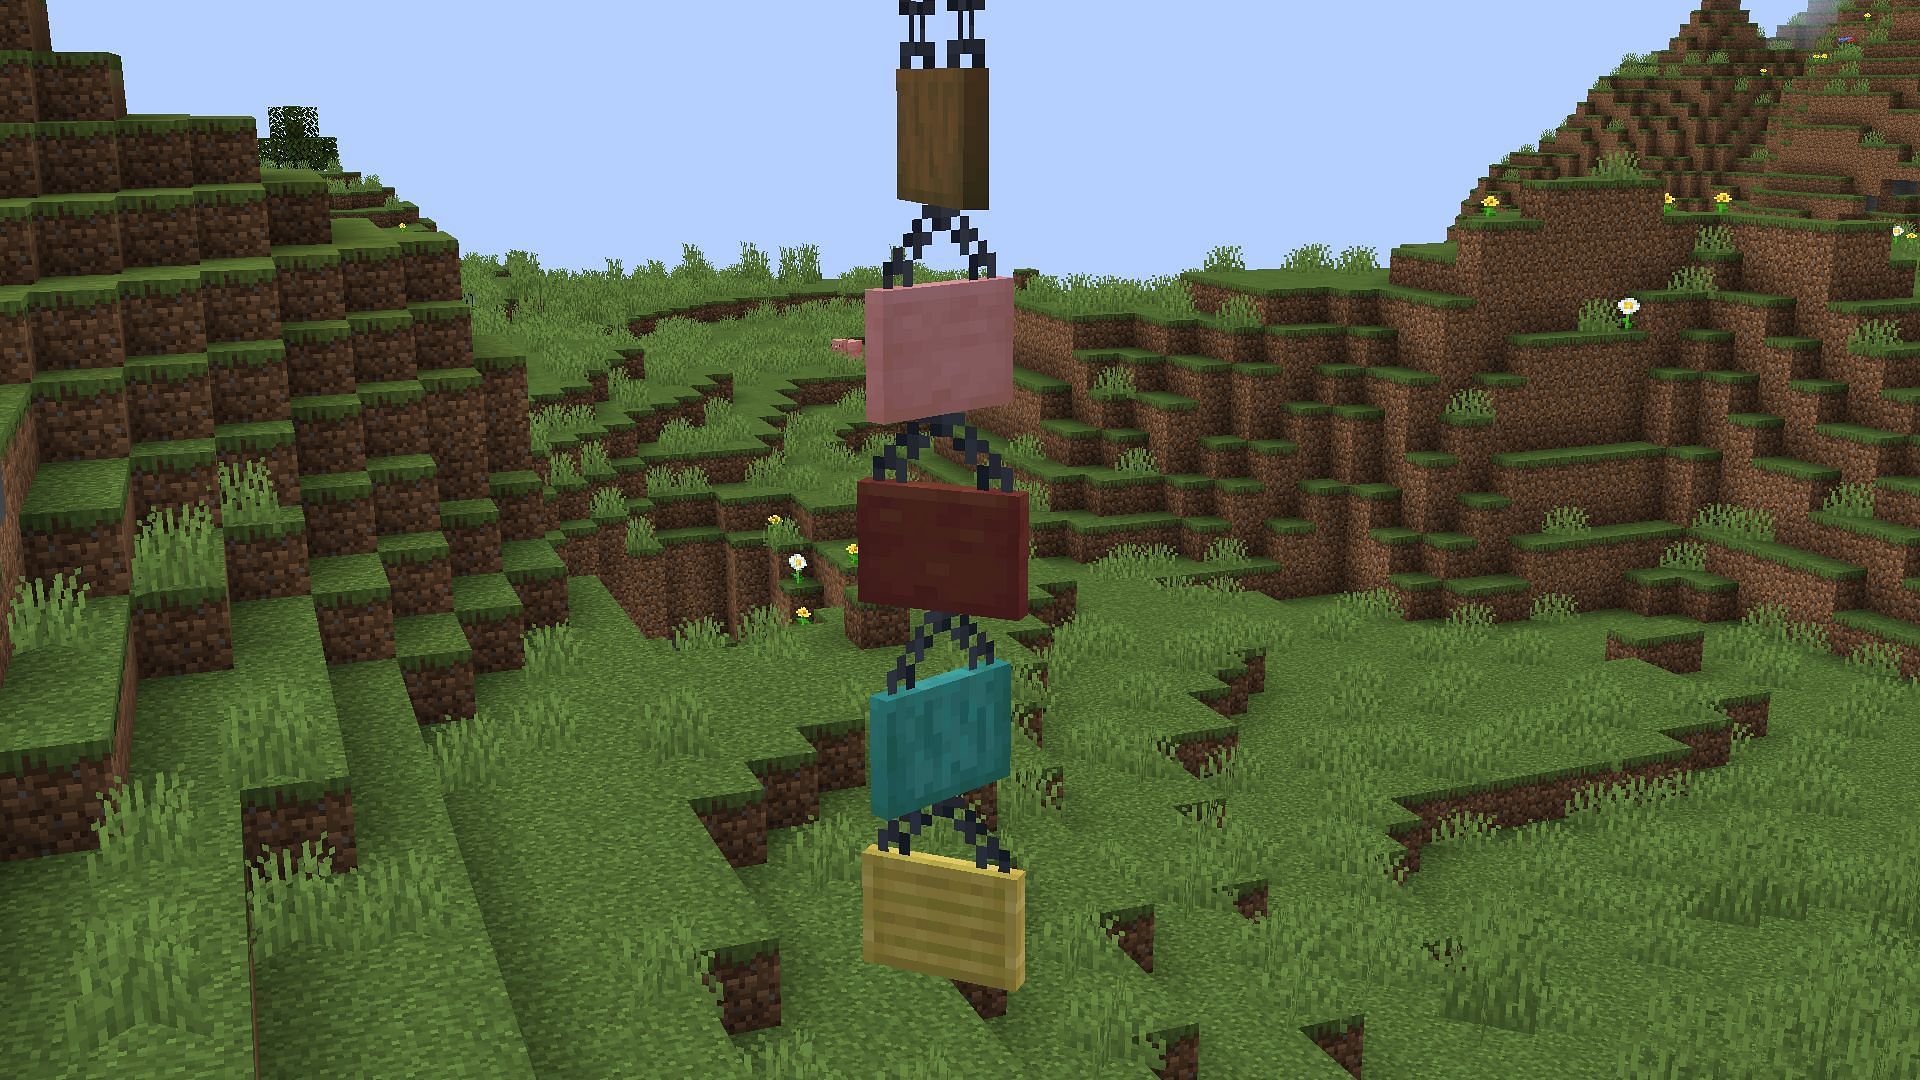 Minecraft 1.20 update brings new hanging signs to the game (Image via Mojang)